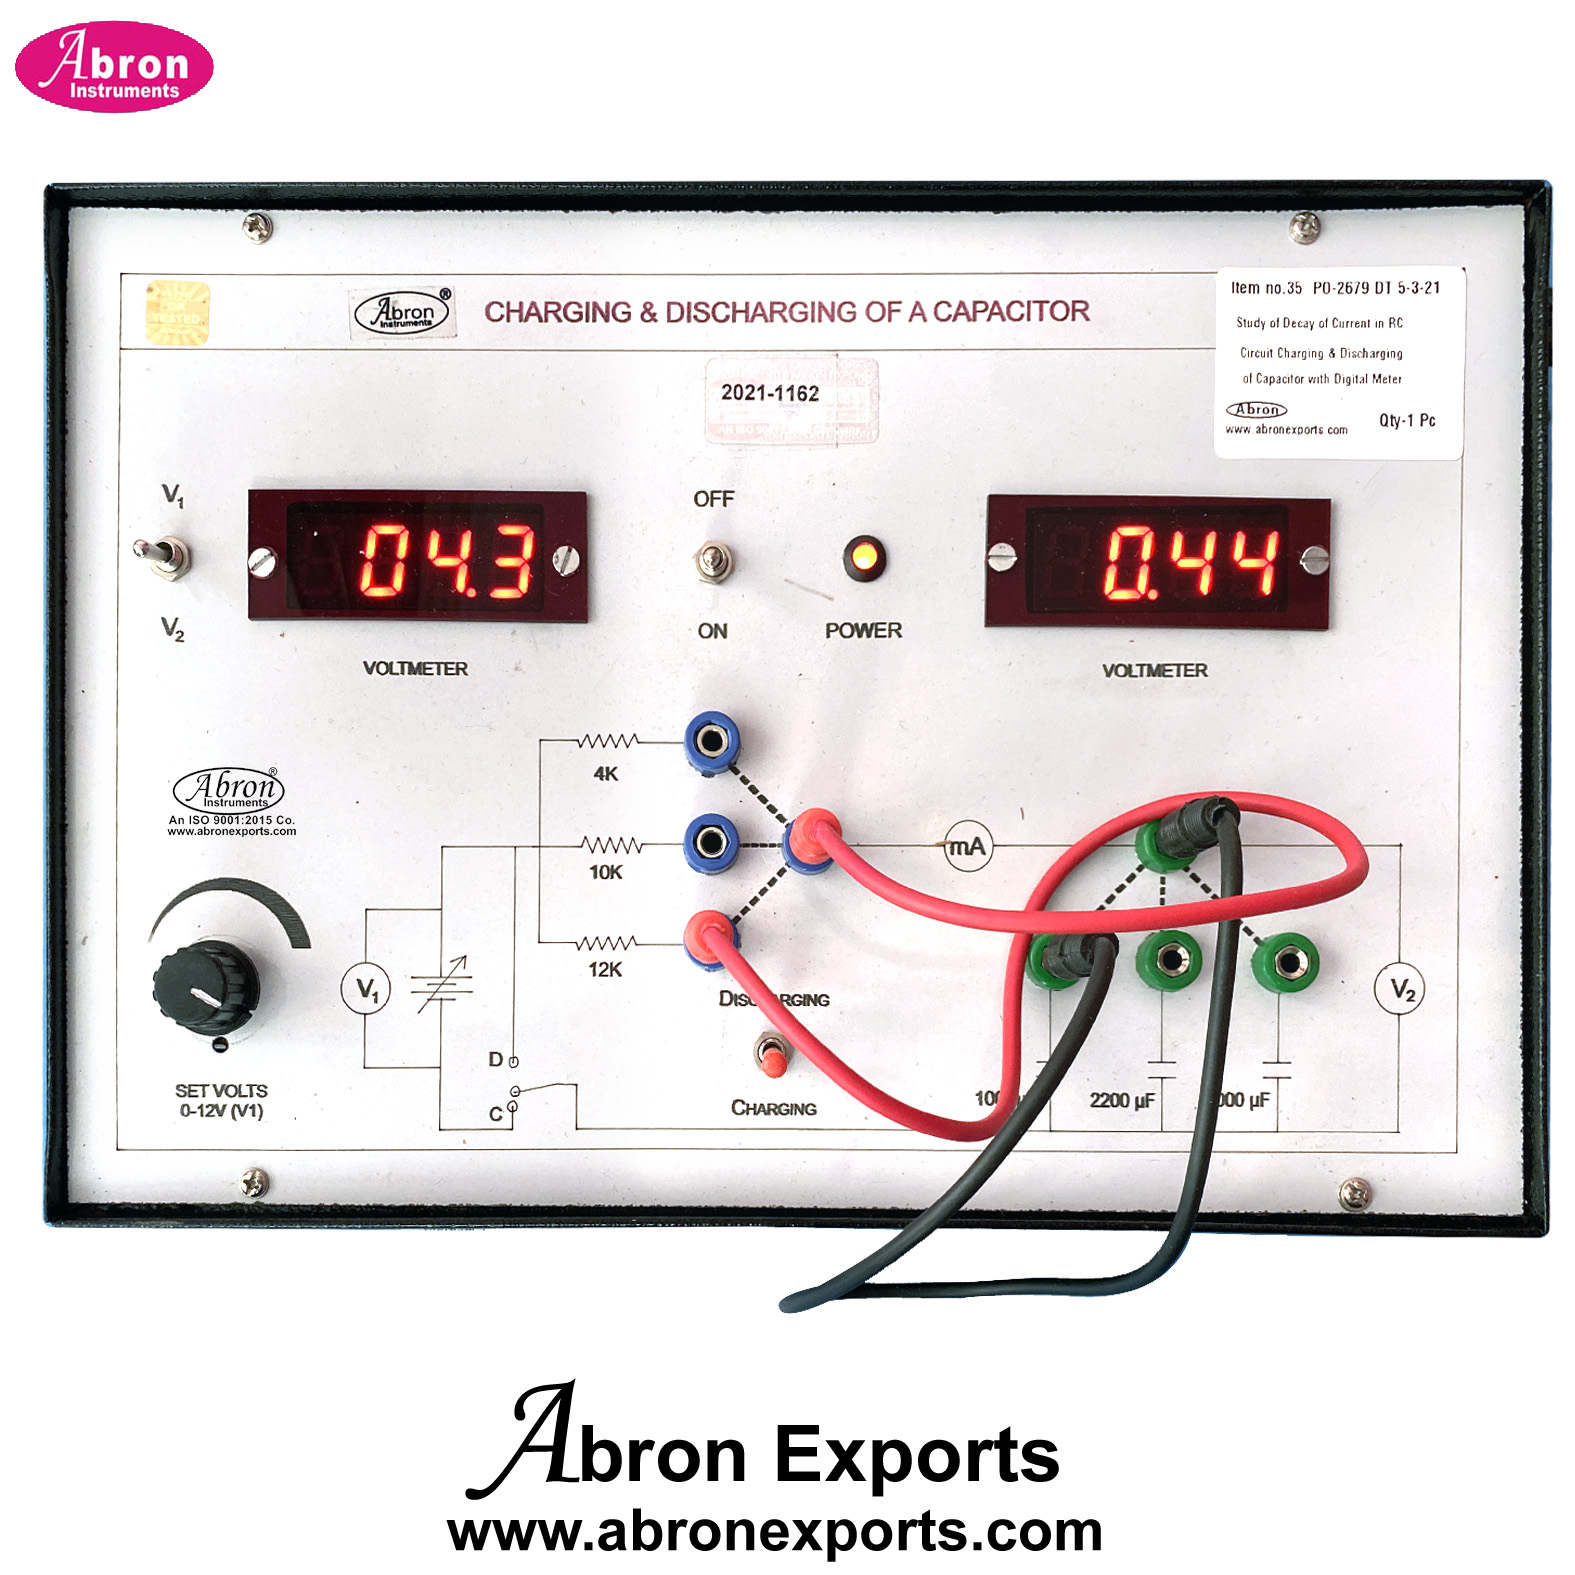 Charging & Discharging Of Capacitor 2 Digital meters Through rate of decay with 2 meters abron AE-1220D